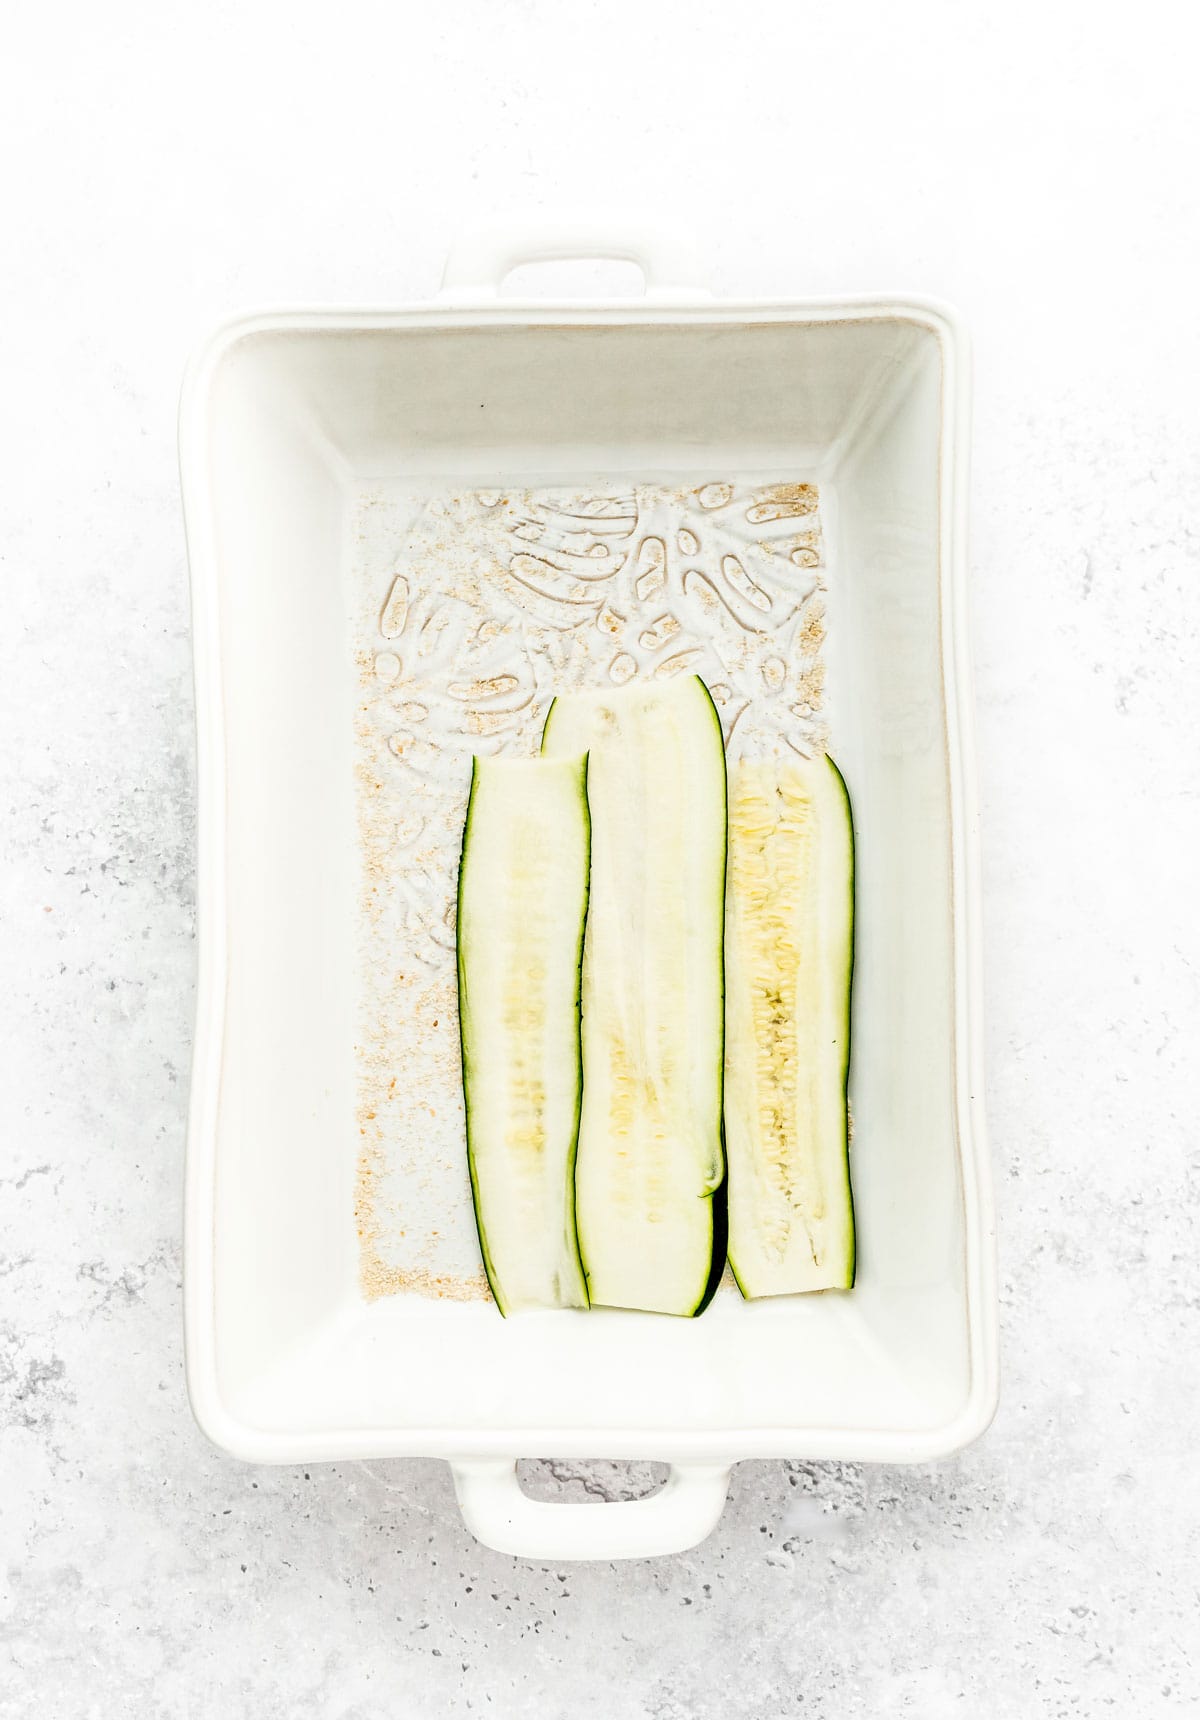 Strips of zucchini on the bottom of a casserole dish.